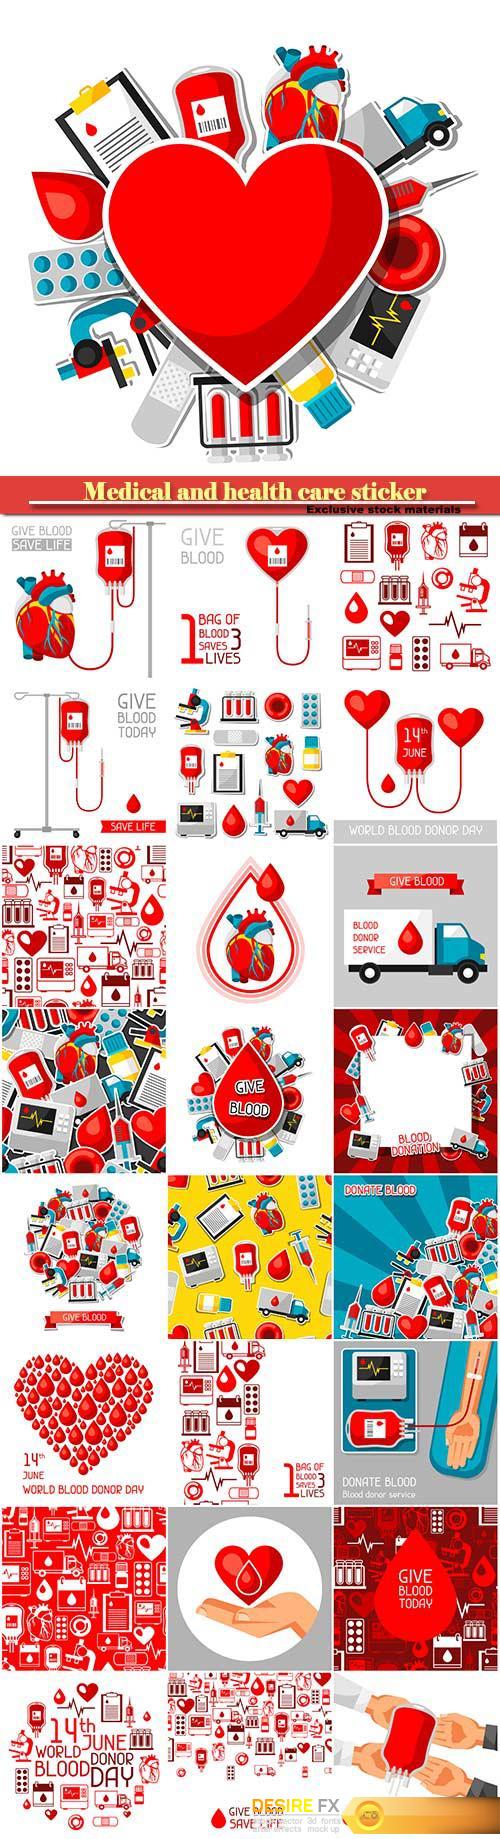 Medical and health care sticker objects, blood donation items